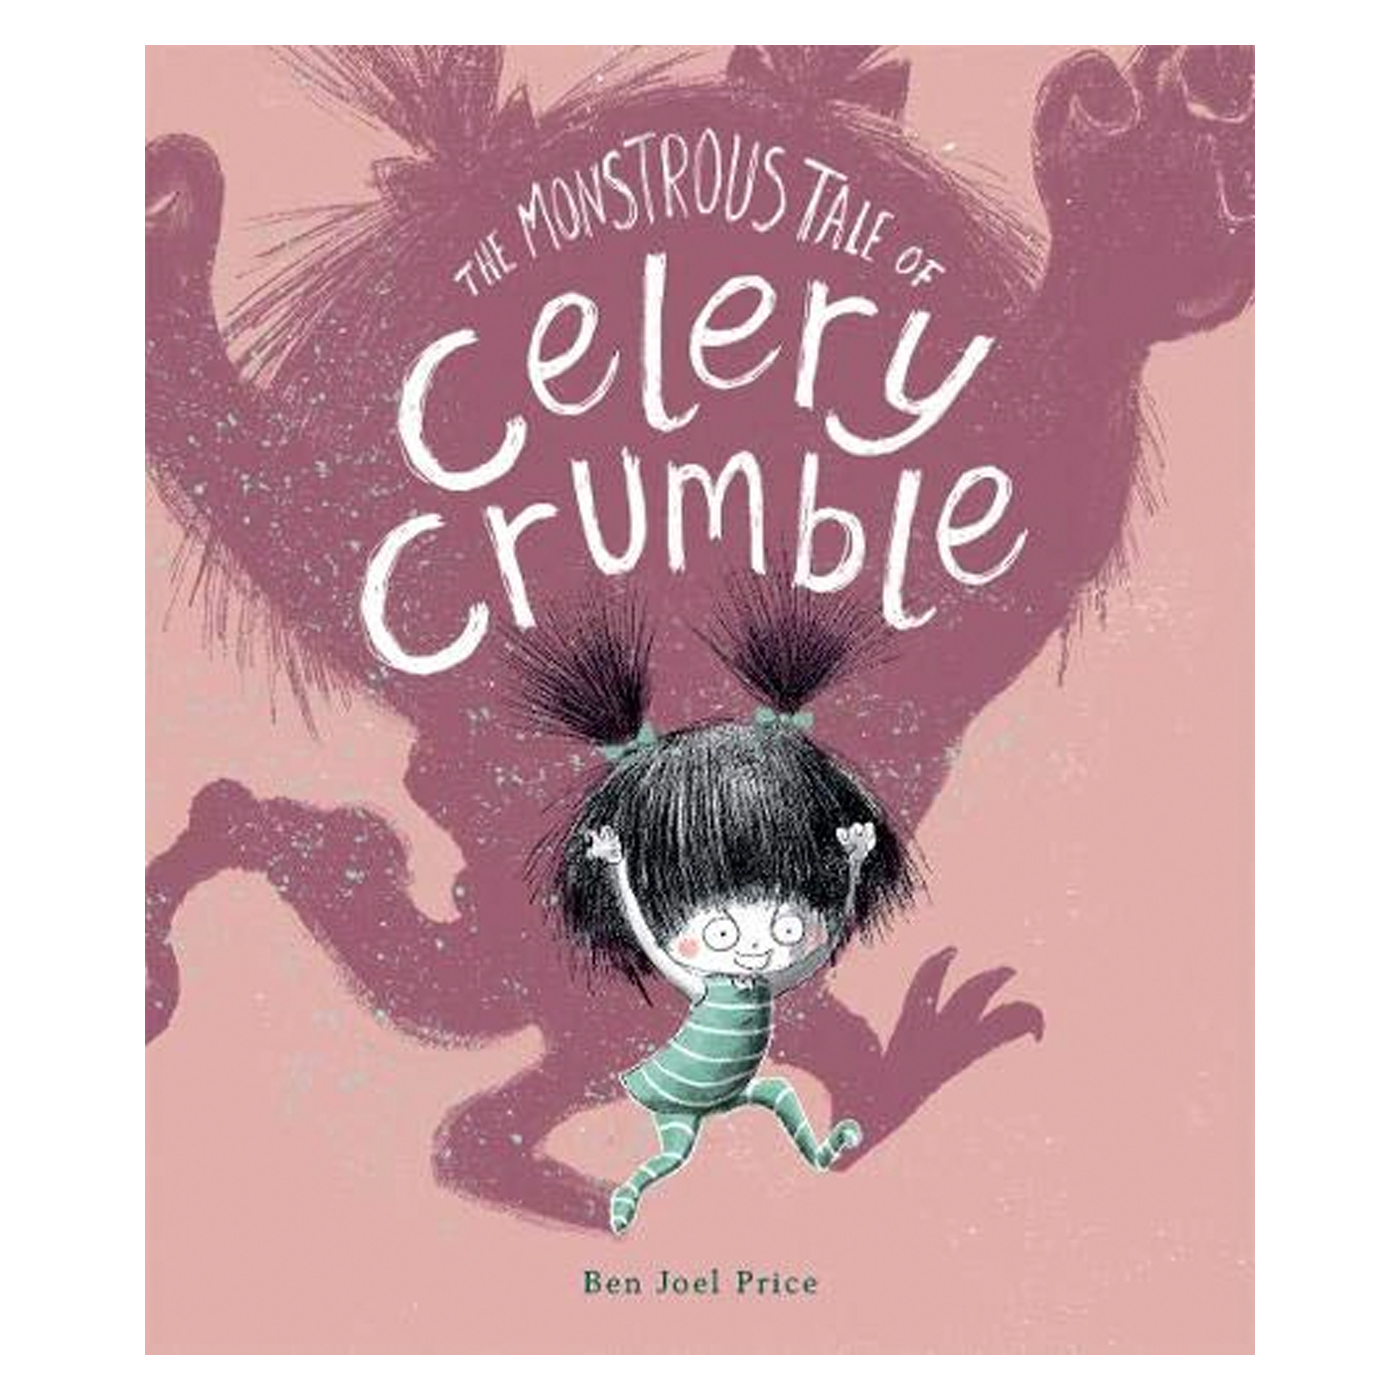 OXFORD CHILDRENS BOOK The Monstrous Tale Of Celery Crumble